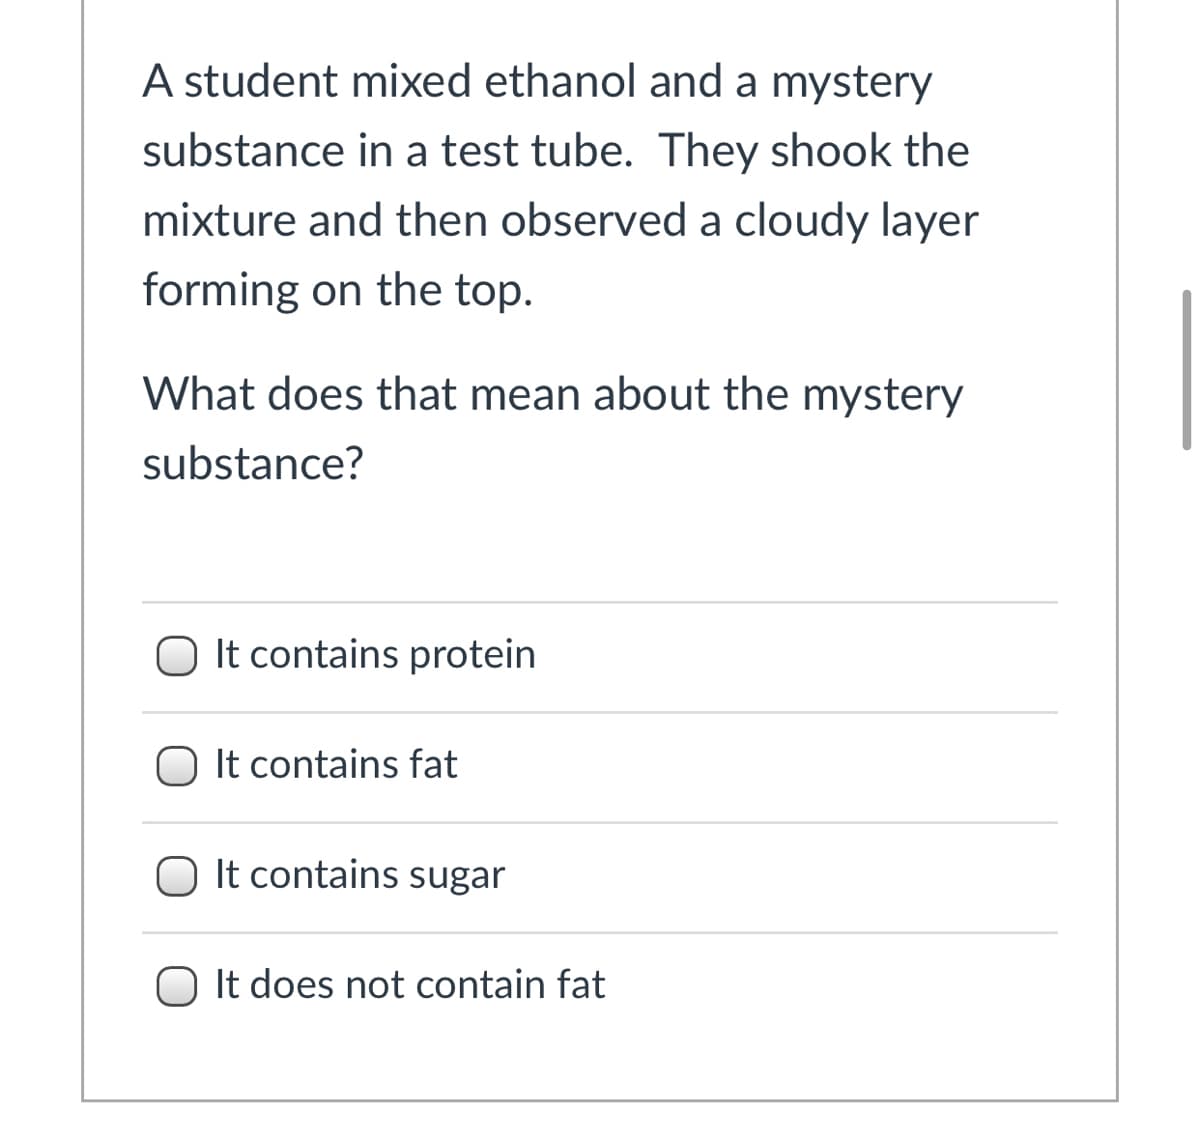 A student mixed ethanol and a mystery
substance in a test tube. They shook the
mixture and then observed a cloudy layer
forming on the top.
What does that mean about the mystery
substance?
O It contains protein
It contains fat
O It contains sugar
O It does not contain fat
